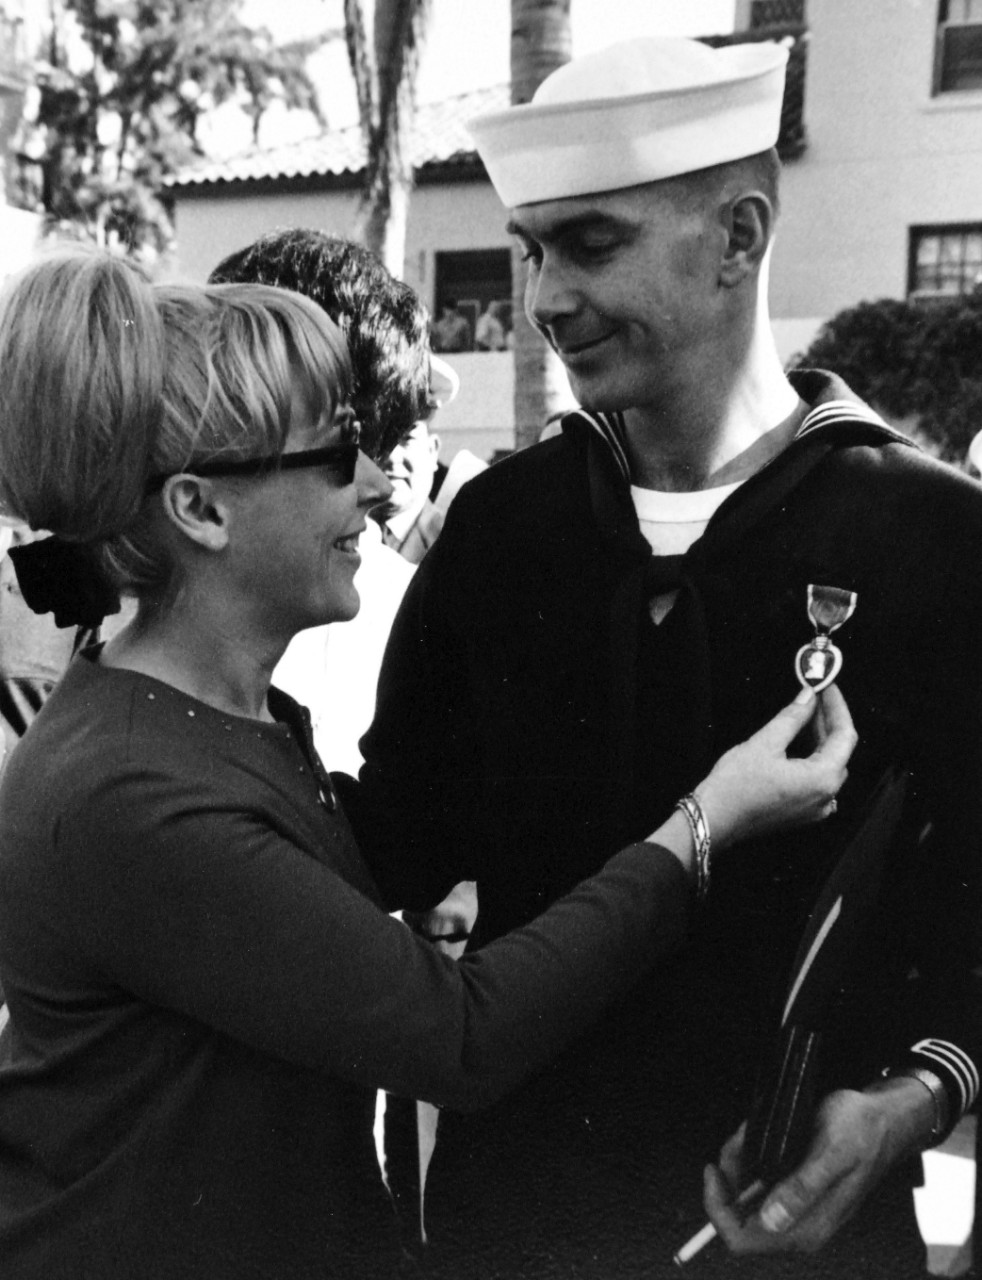 428-GX-USN-1140180:   San Diego, California, January 4, 1969.   Yeoman First Class Armando M. Canales displays the Purple Heart medal he received during an award presentation to the released members of USS Pueblo (AGER-2). Photographed by PH1 Robert E. Woods.   Official U.S. Navy Photograph, now in the collections of the National Archives.  (2017/05/23).  Photographed from reference card.  